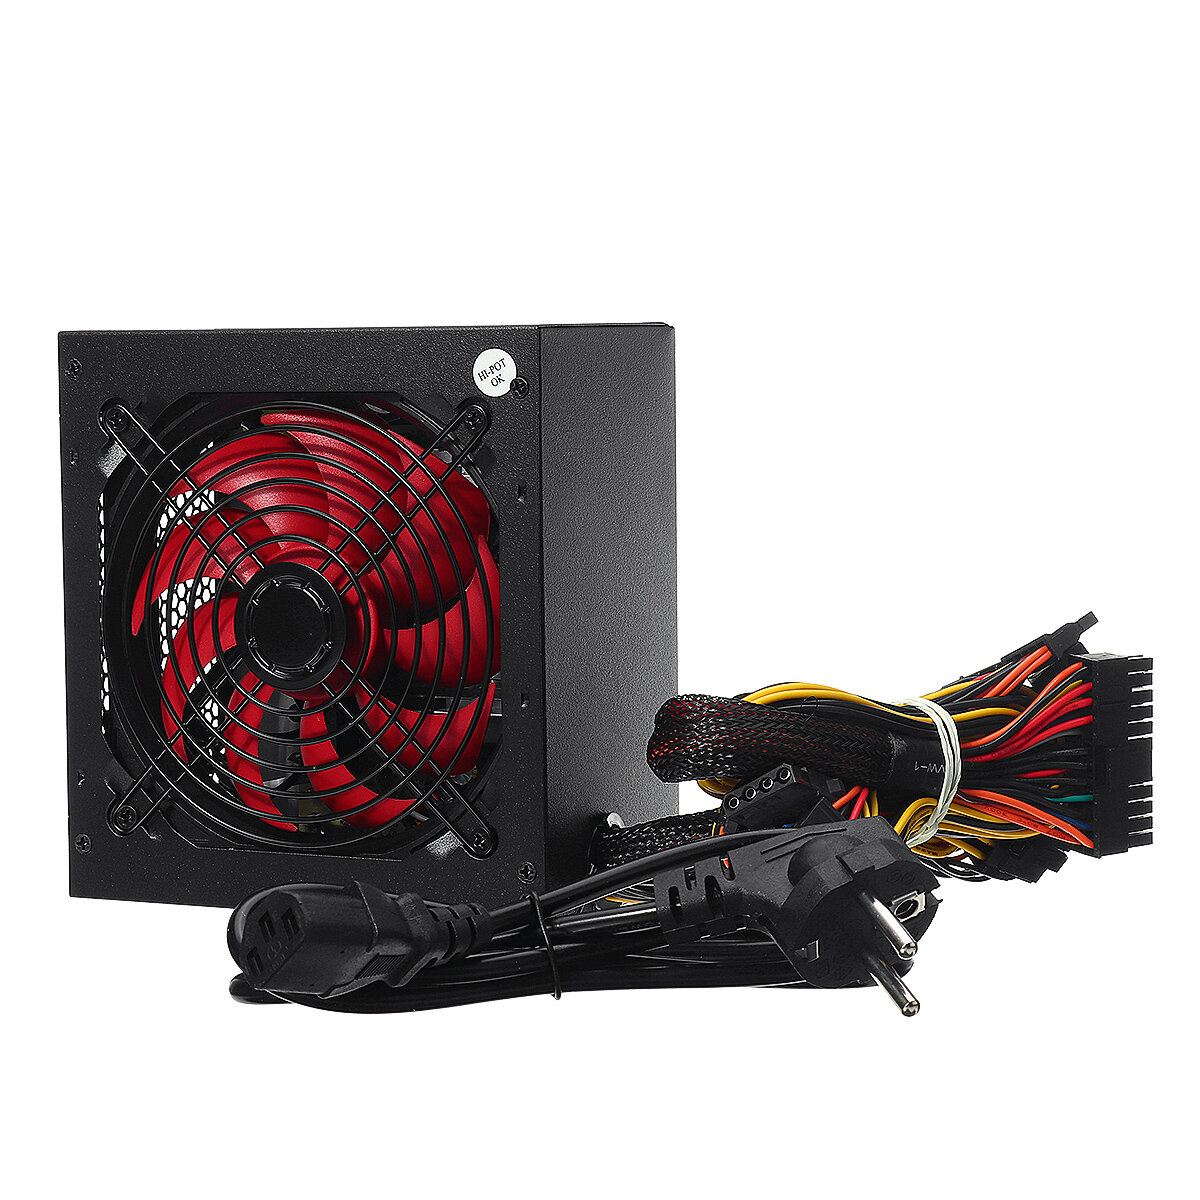 

650W Power Supply Passive PFC 120mm LED Fan 12V ATX SATA PC Computer Power Supply for Desktop Gaming Computer